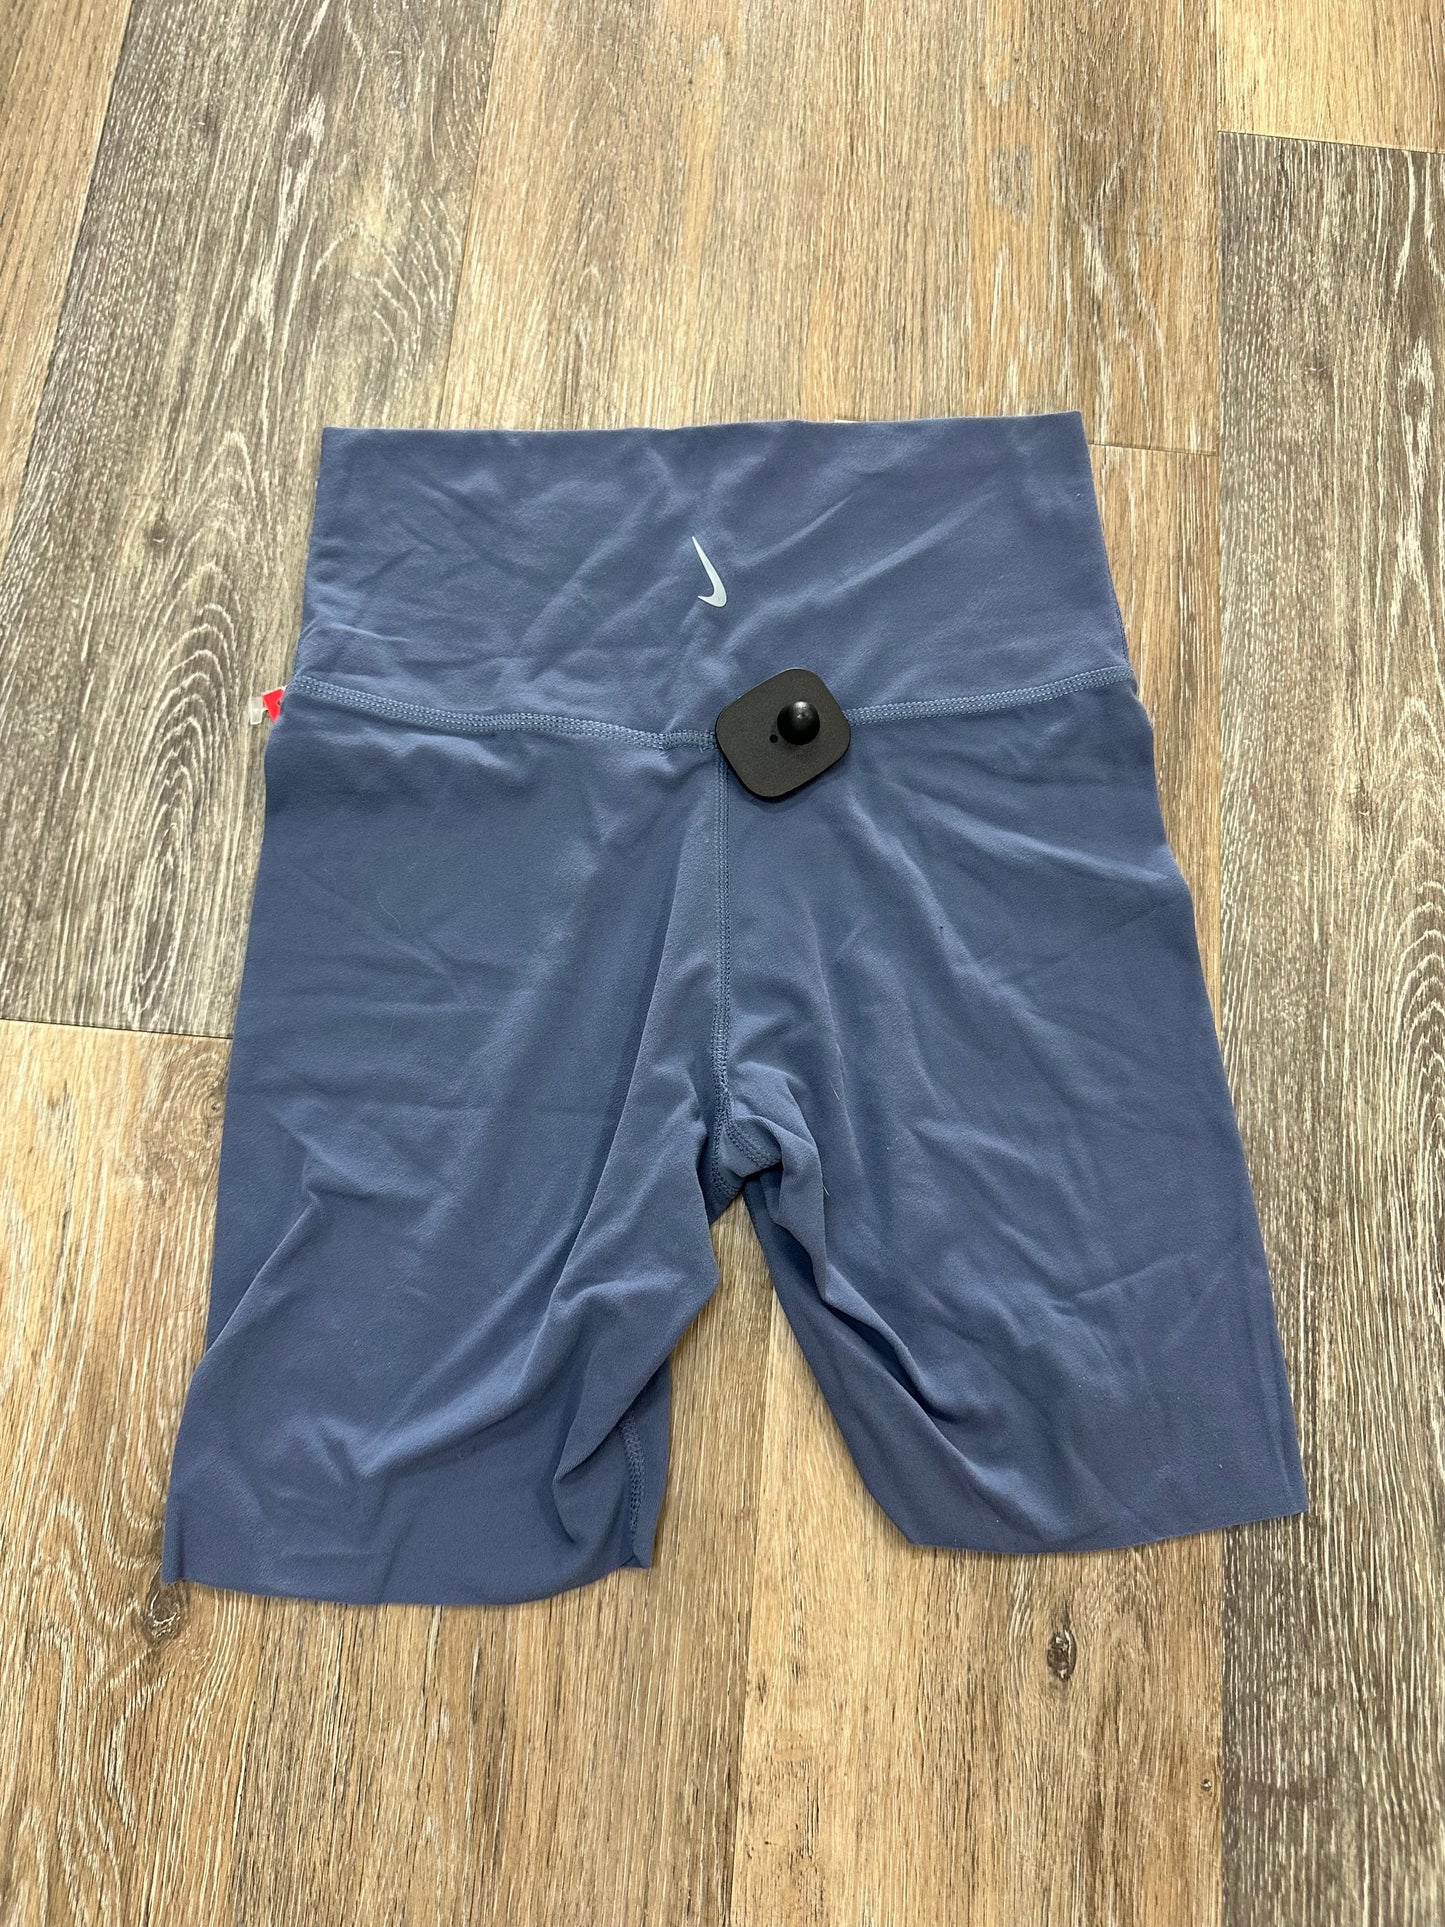 Blue Athletic Shorts Nike Apparel, Size S